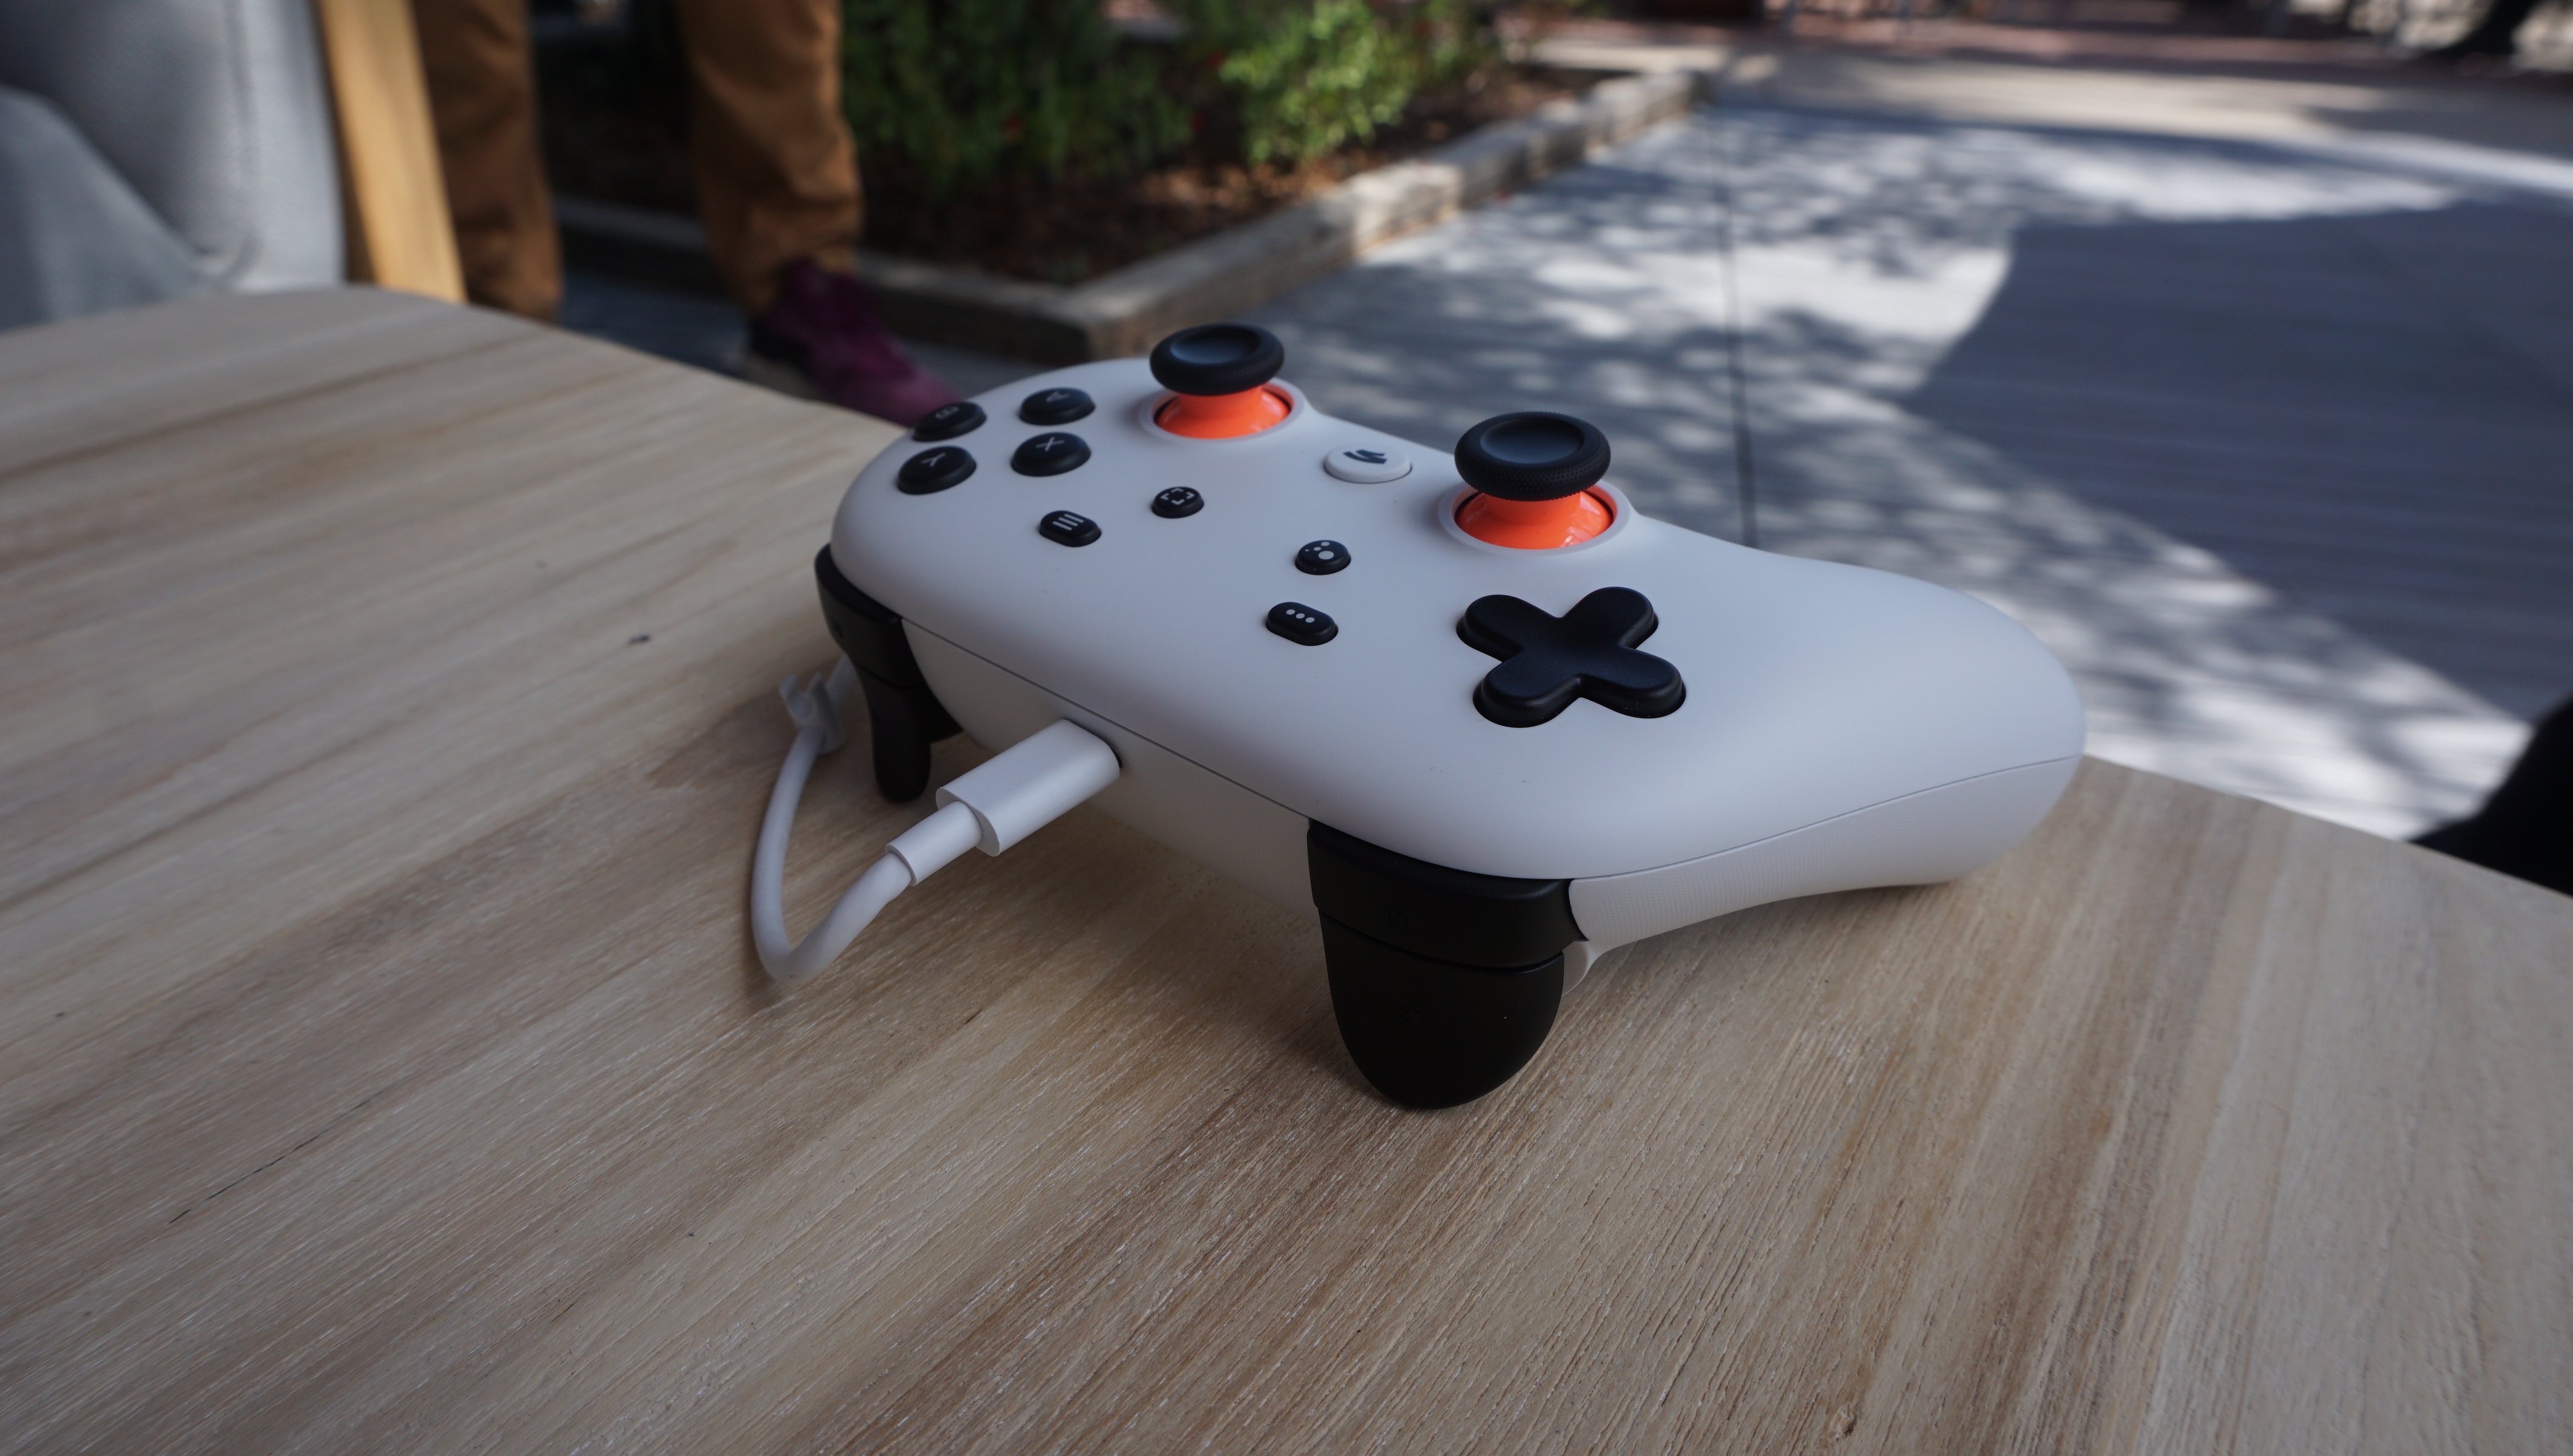 ps4 controller stadia